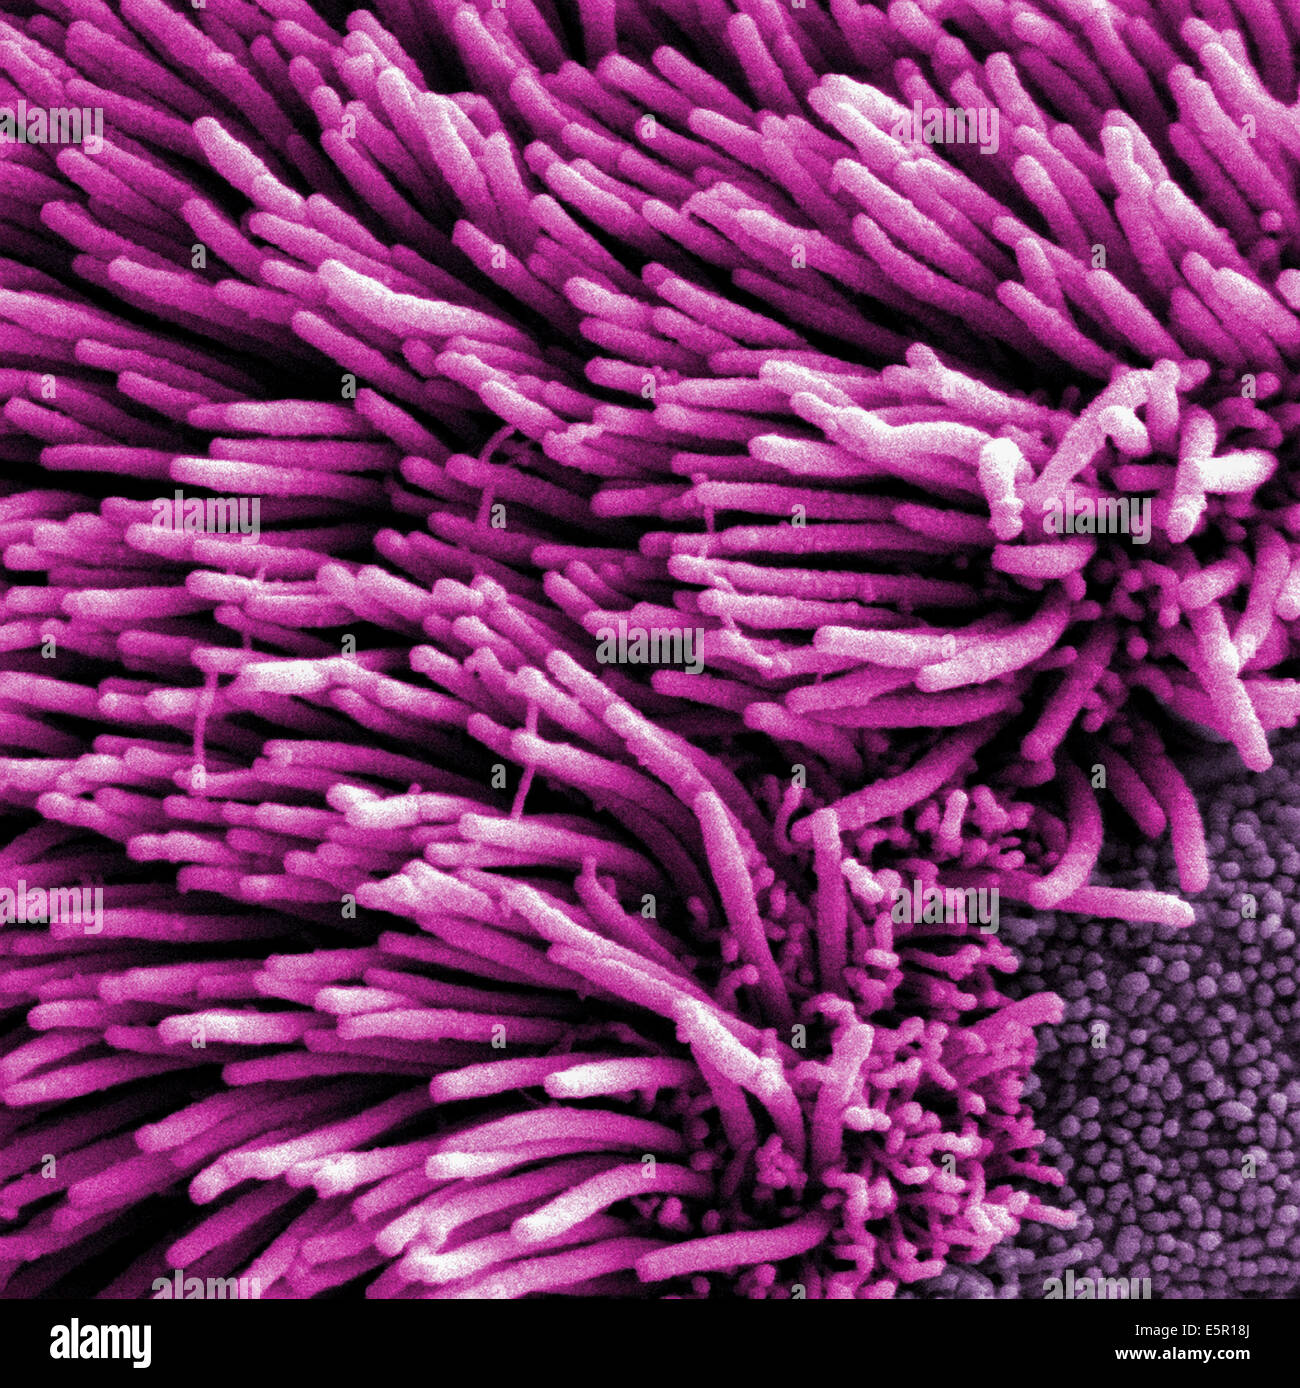 Scanning electron micrograph (SEM) of the lung trachea epithelium which consists of ciliated cells seen here, and non-ciliated Stock Photo